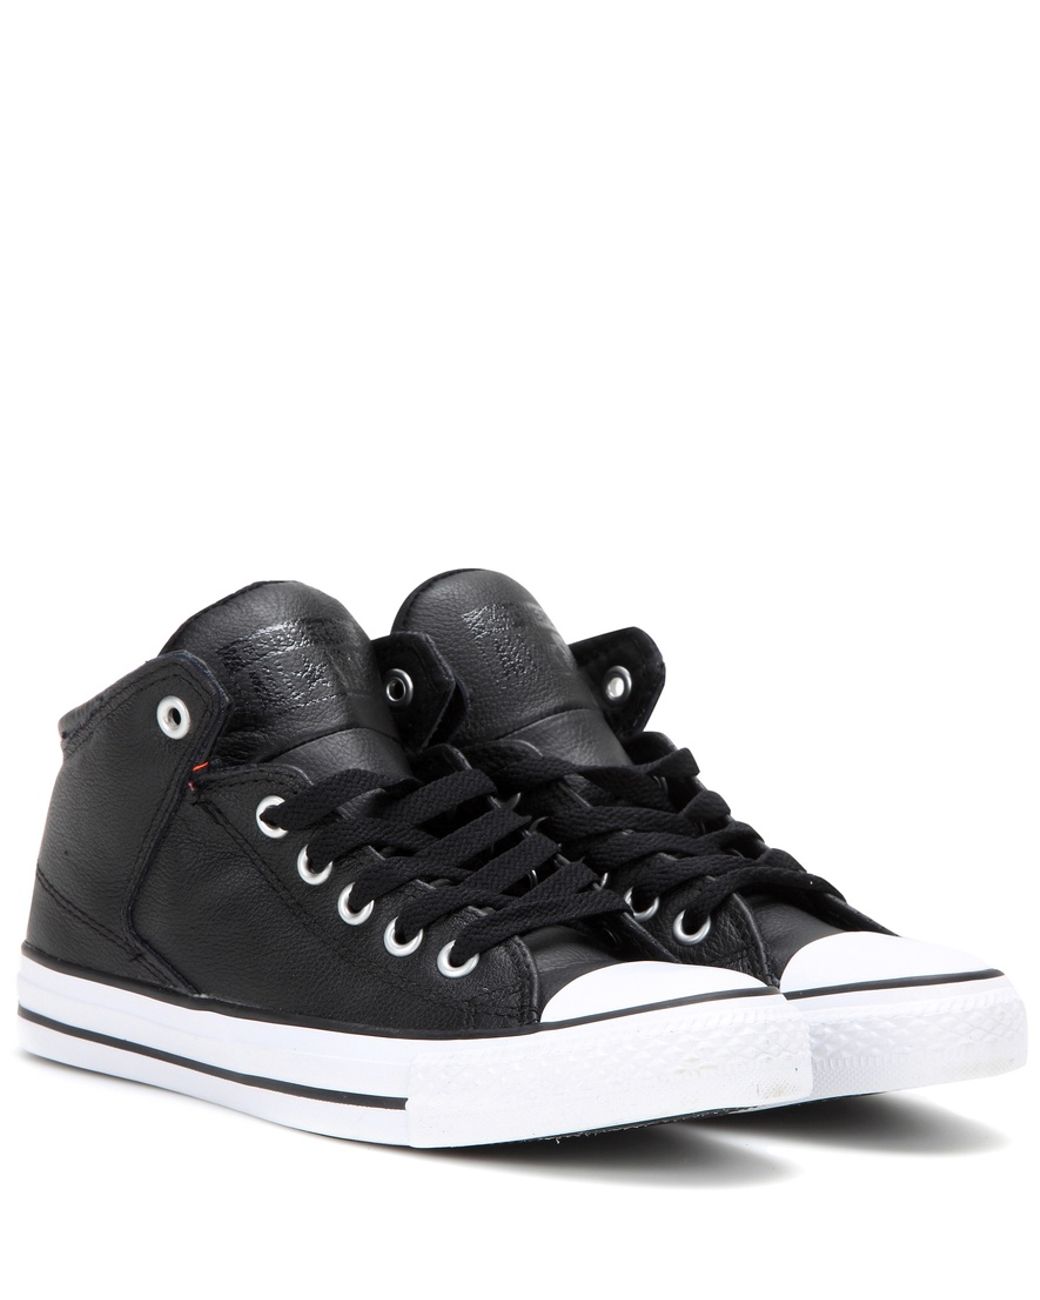 Converse Chuck Taylor All Star High Street Leather Sneakers in Black | Lyst